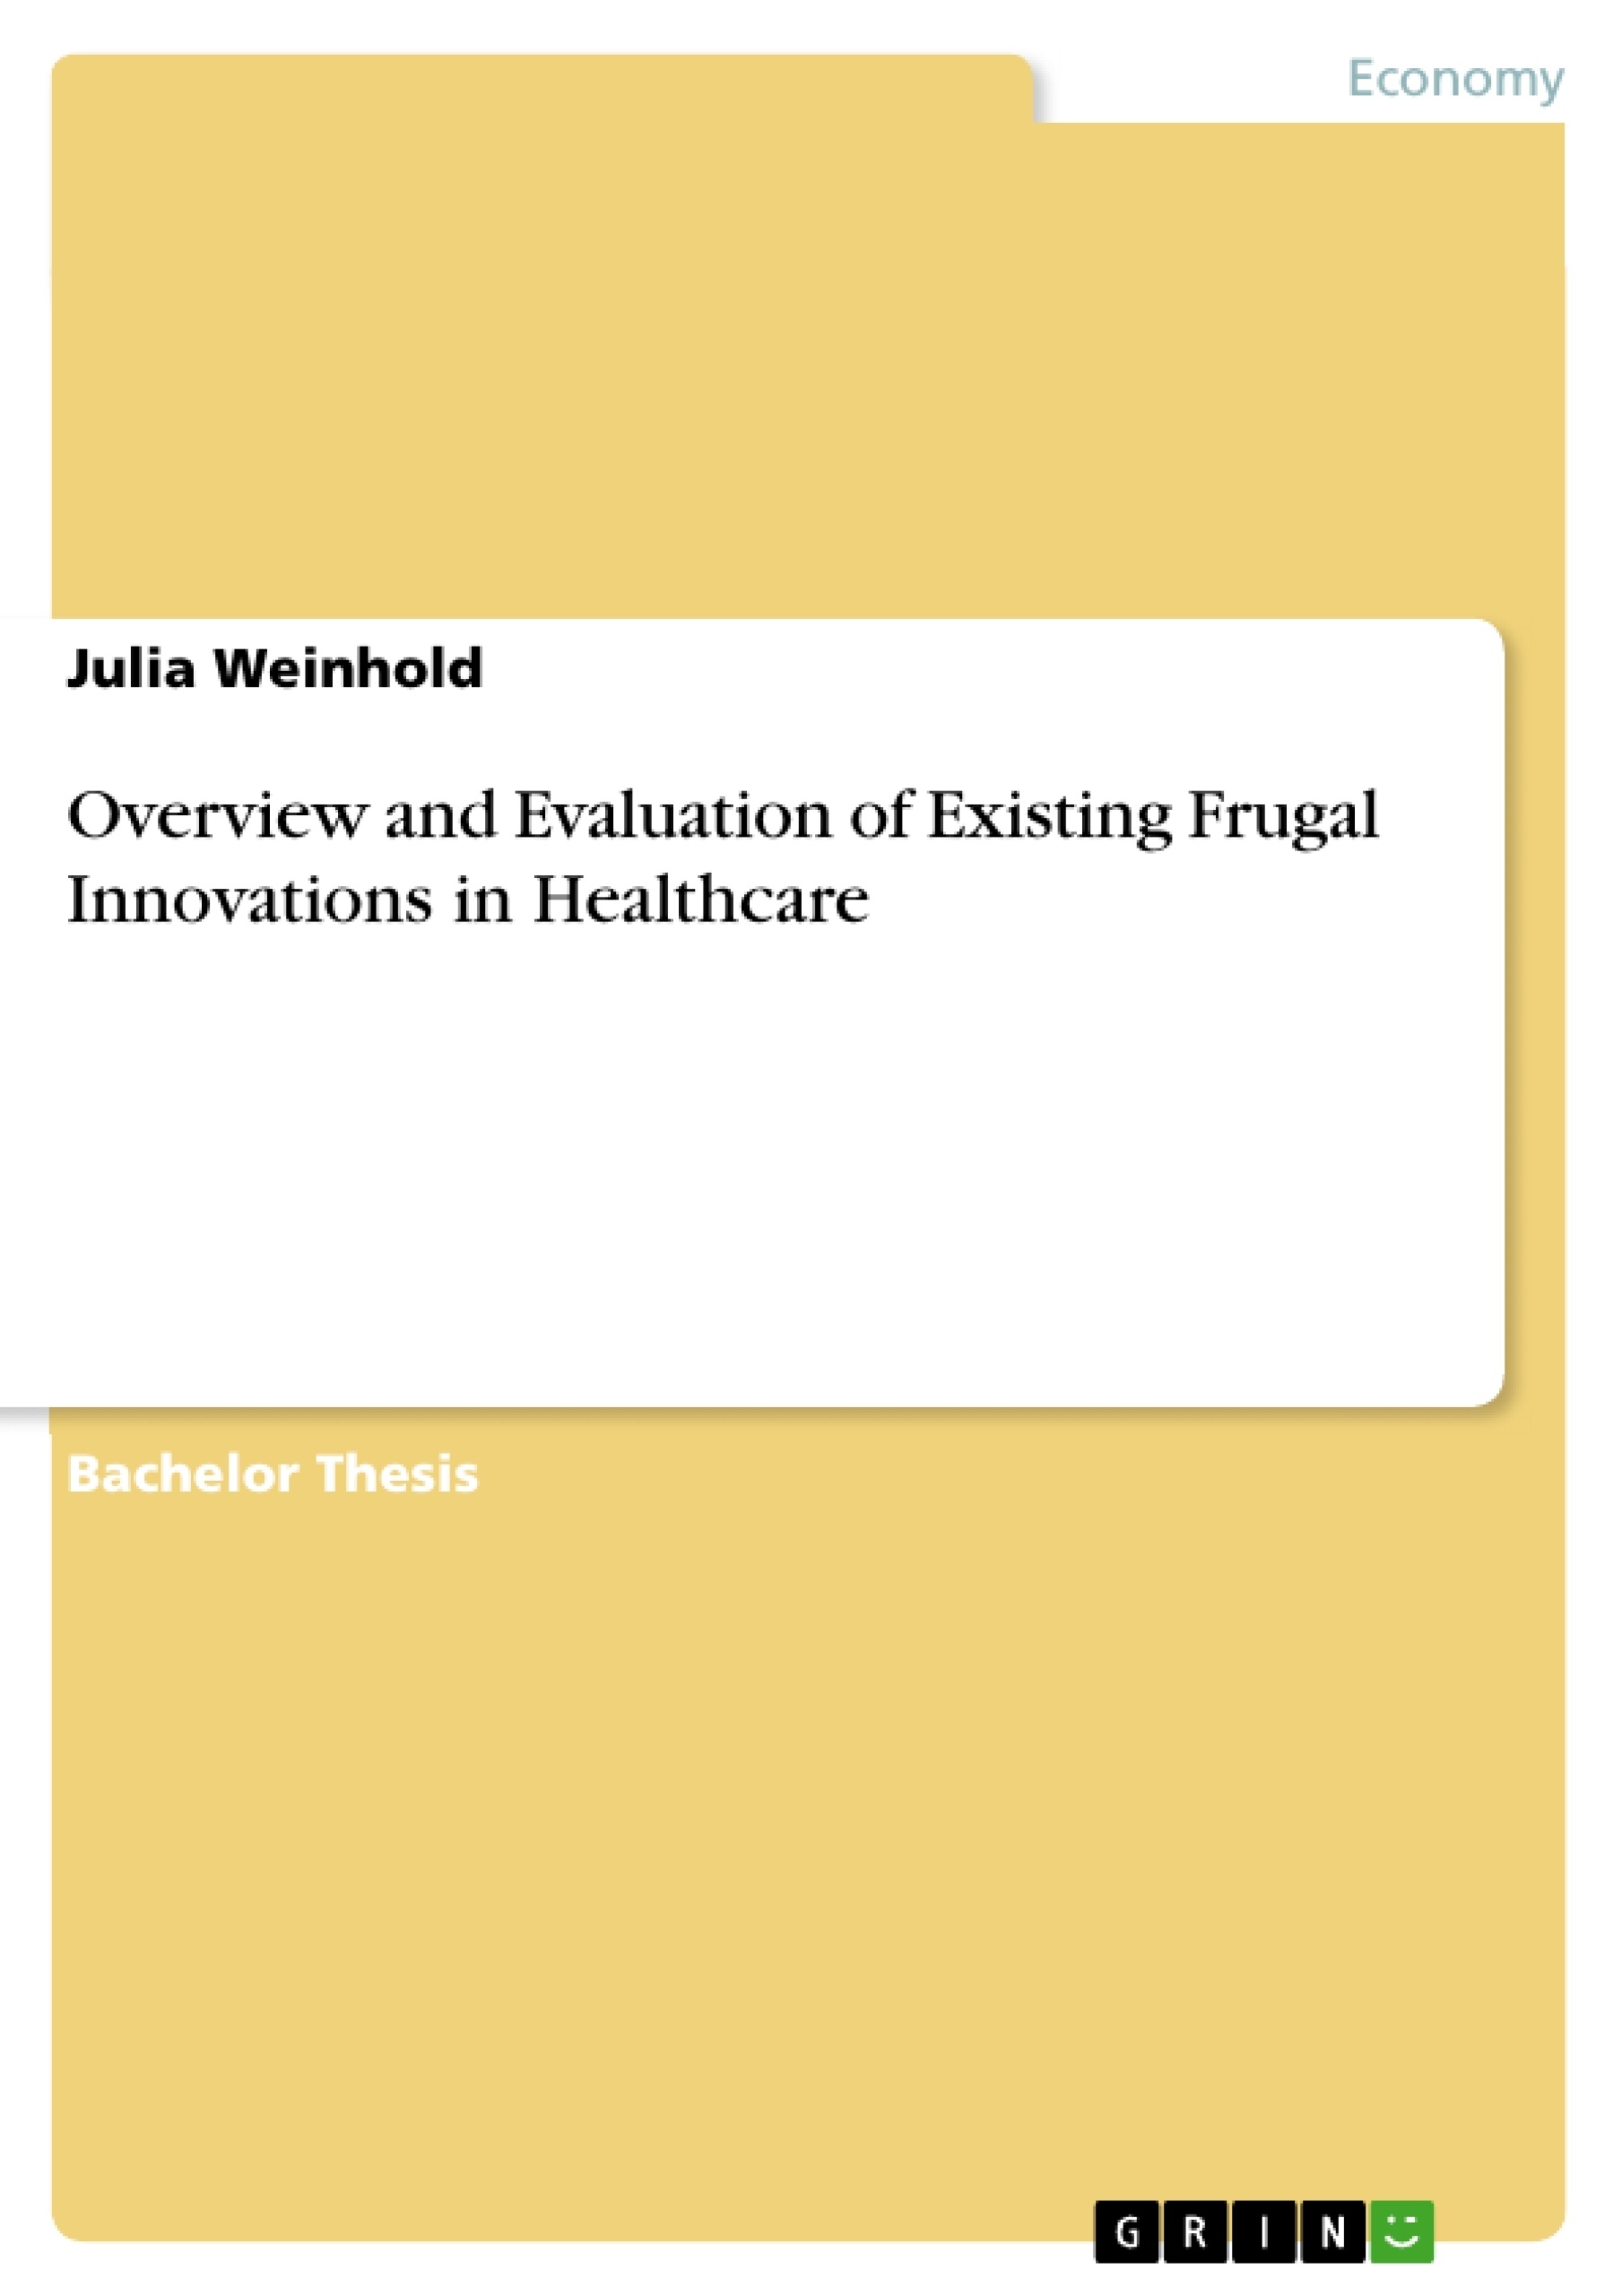 Title: Overview and Evaluation of Existing Frugal Innovations in Healthcare